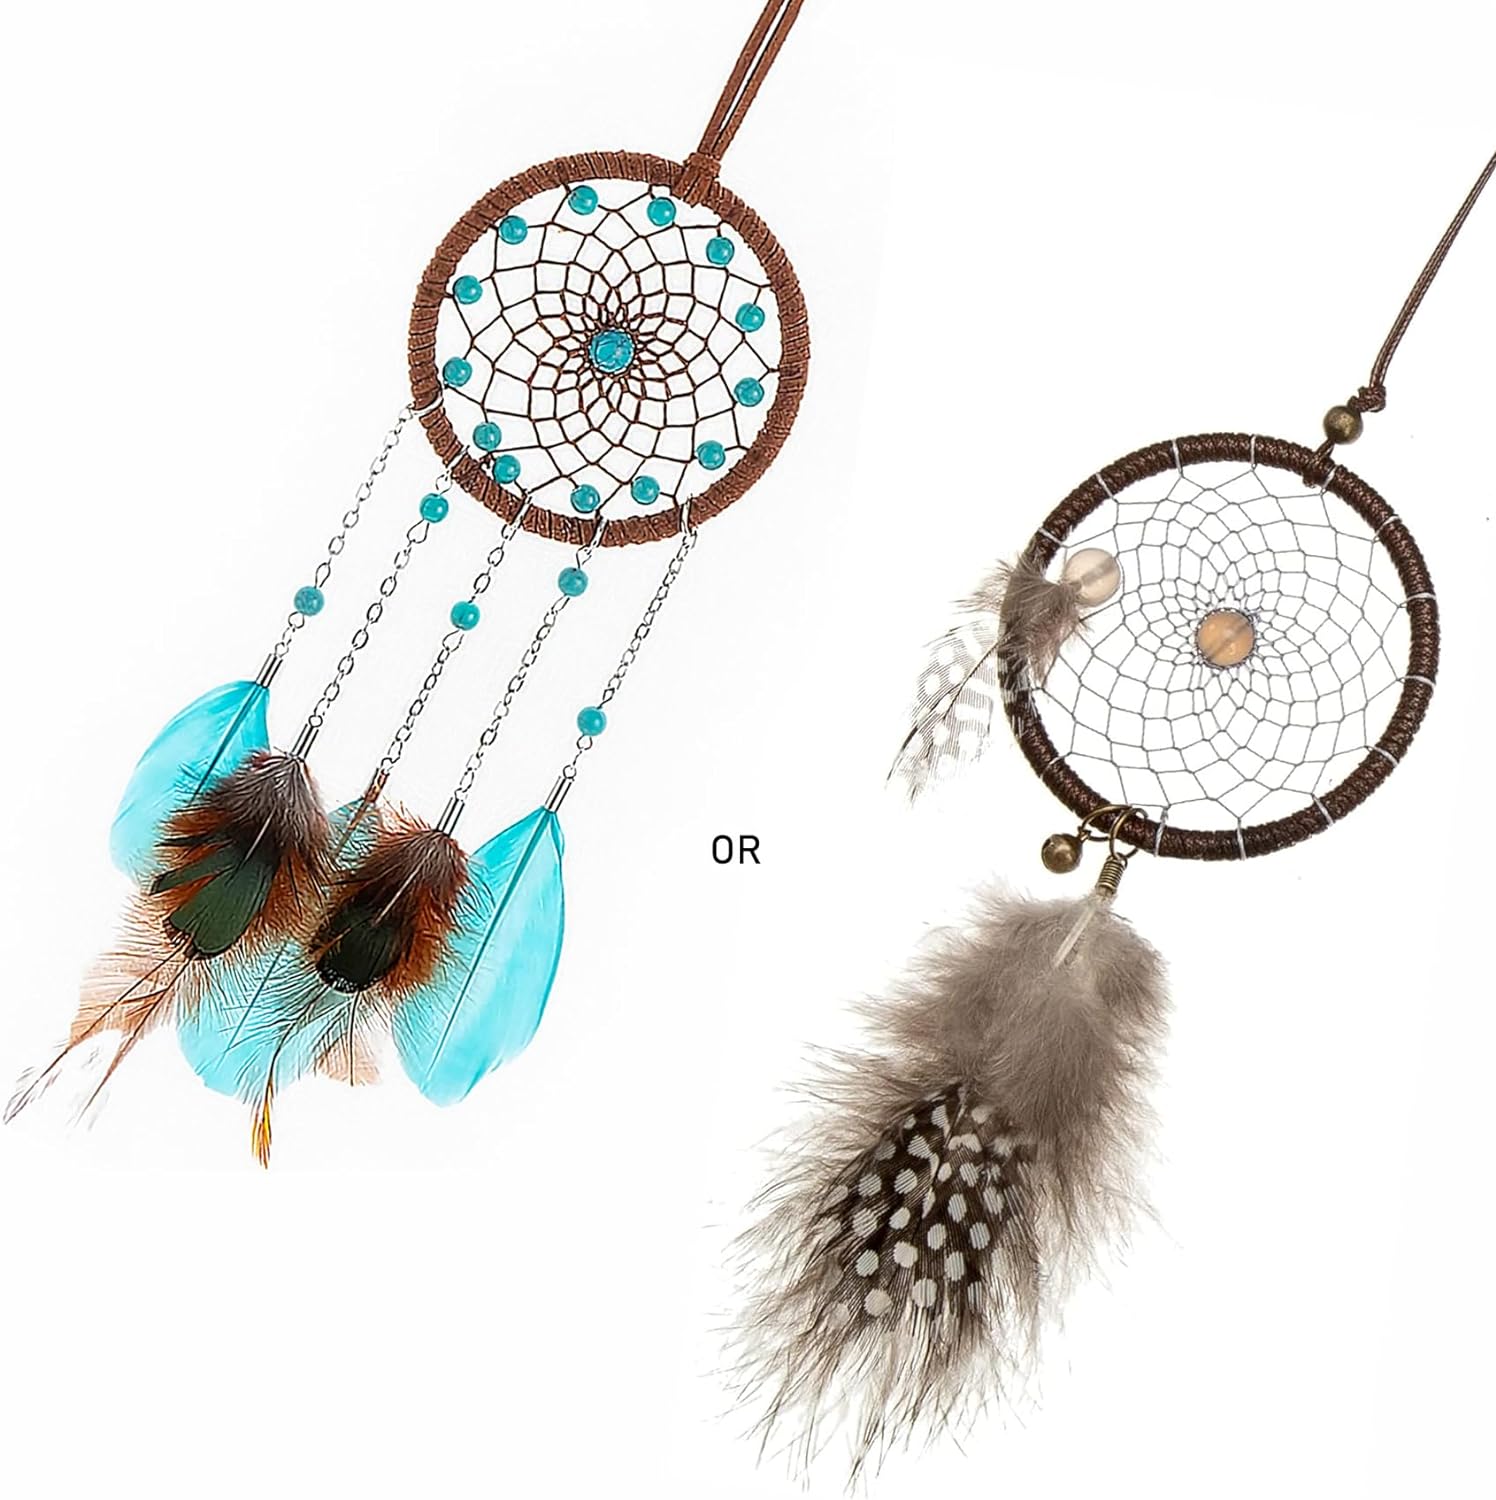 Mini Dream Catchers - Pearl Chicken Feather with Grey Agate Healing Crystal, Handmade Small Dreamcatcher for Home Dorm Decor - HOLSM-III